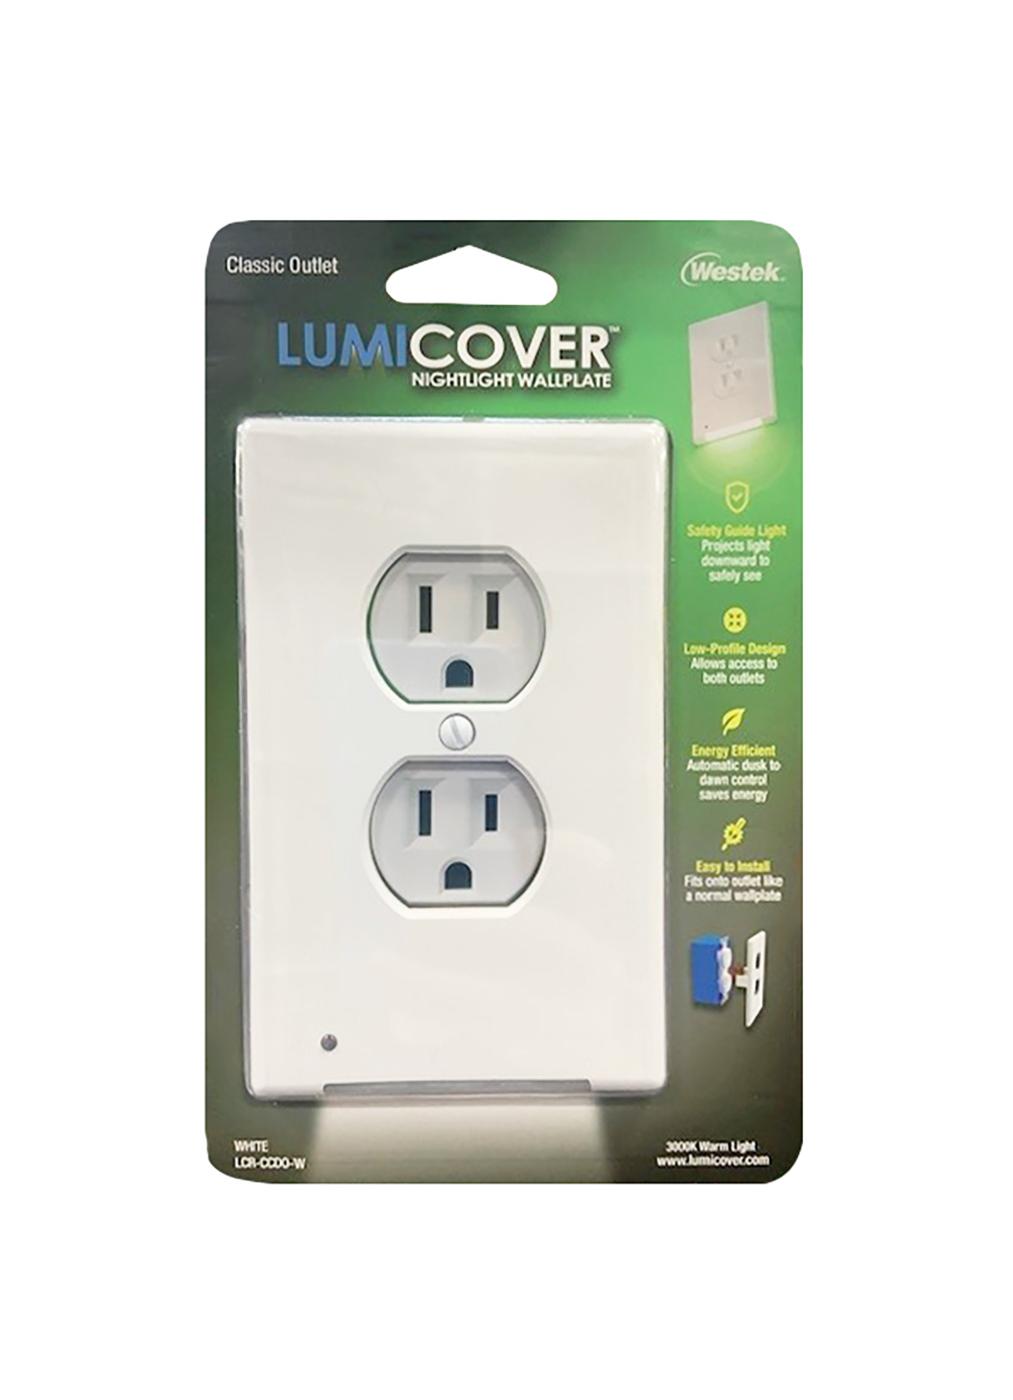 Amertac LumiCover Classic Cover Night Light Wall Plate - White; image 2 of 2